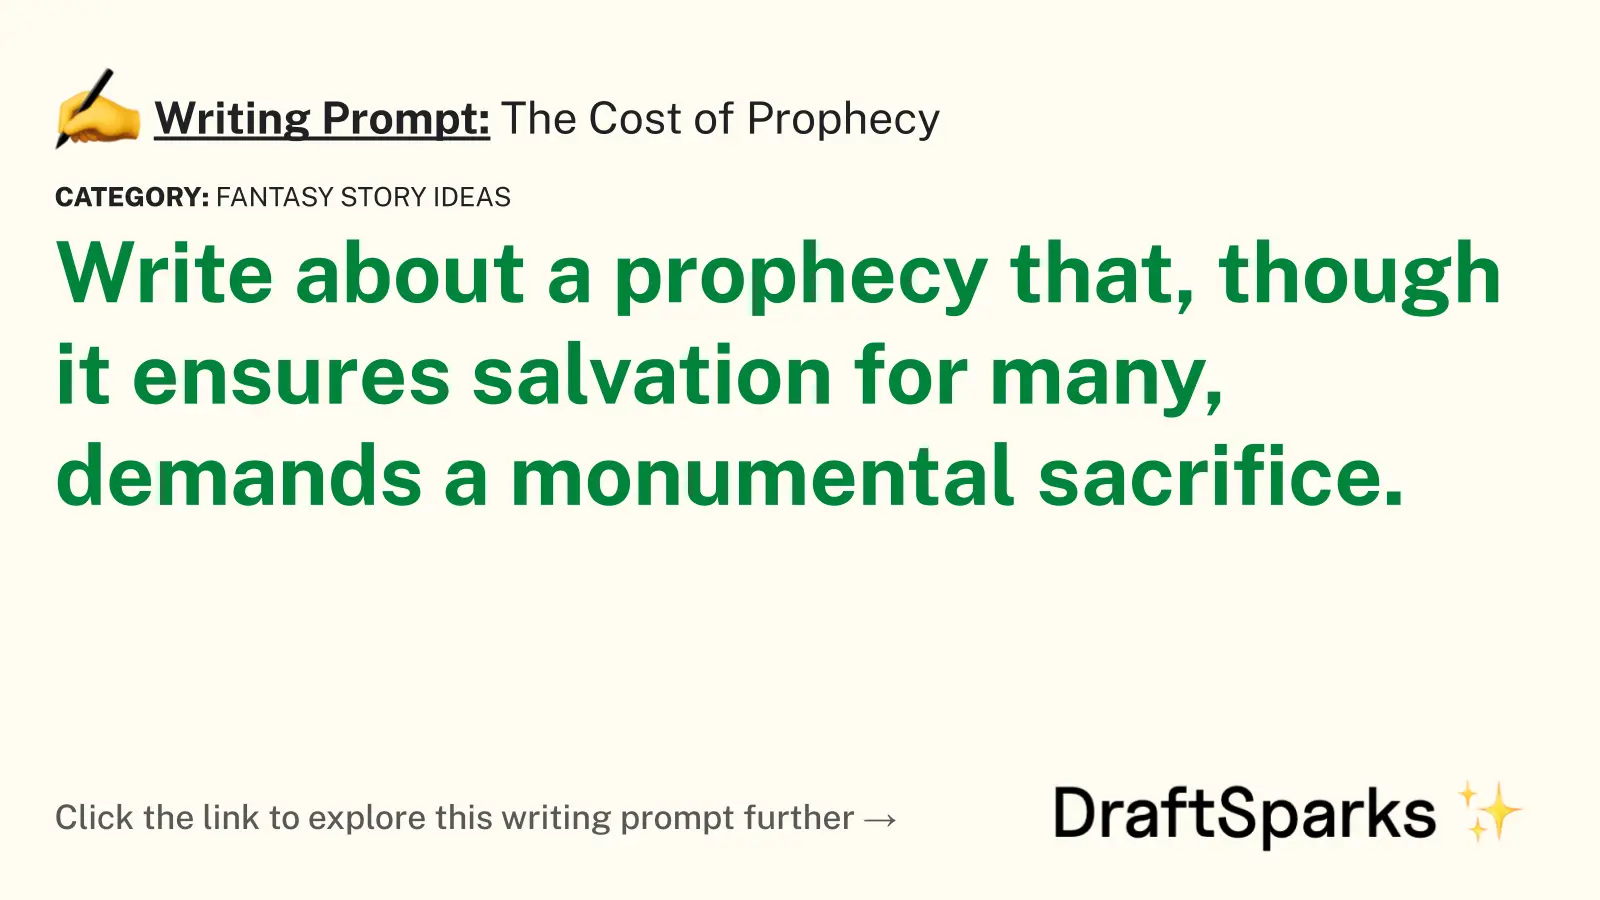 The Cost of Prophecy